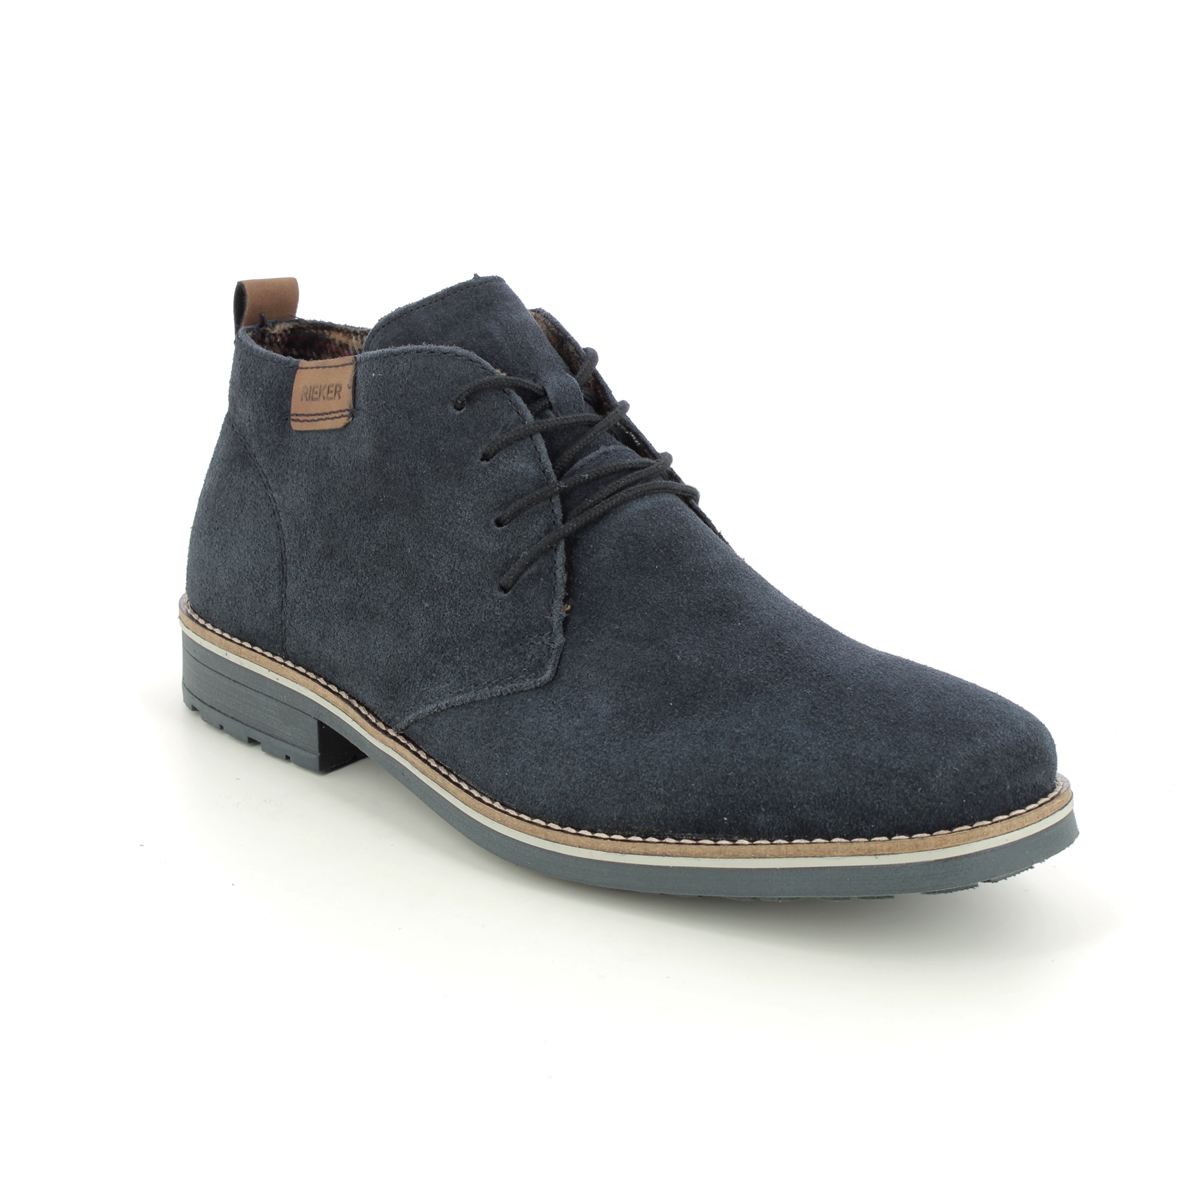 Rieker 33206-14 Navy Suede Mens Chukka Boots in a Plain Leather in Size 46